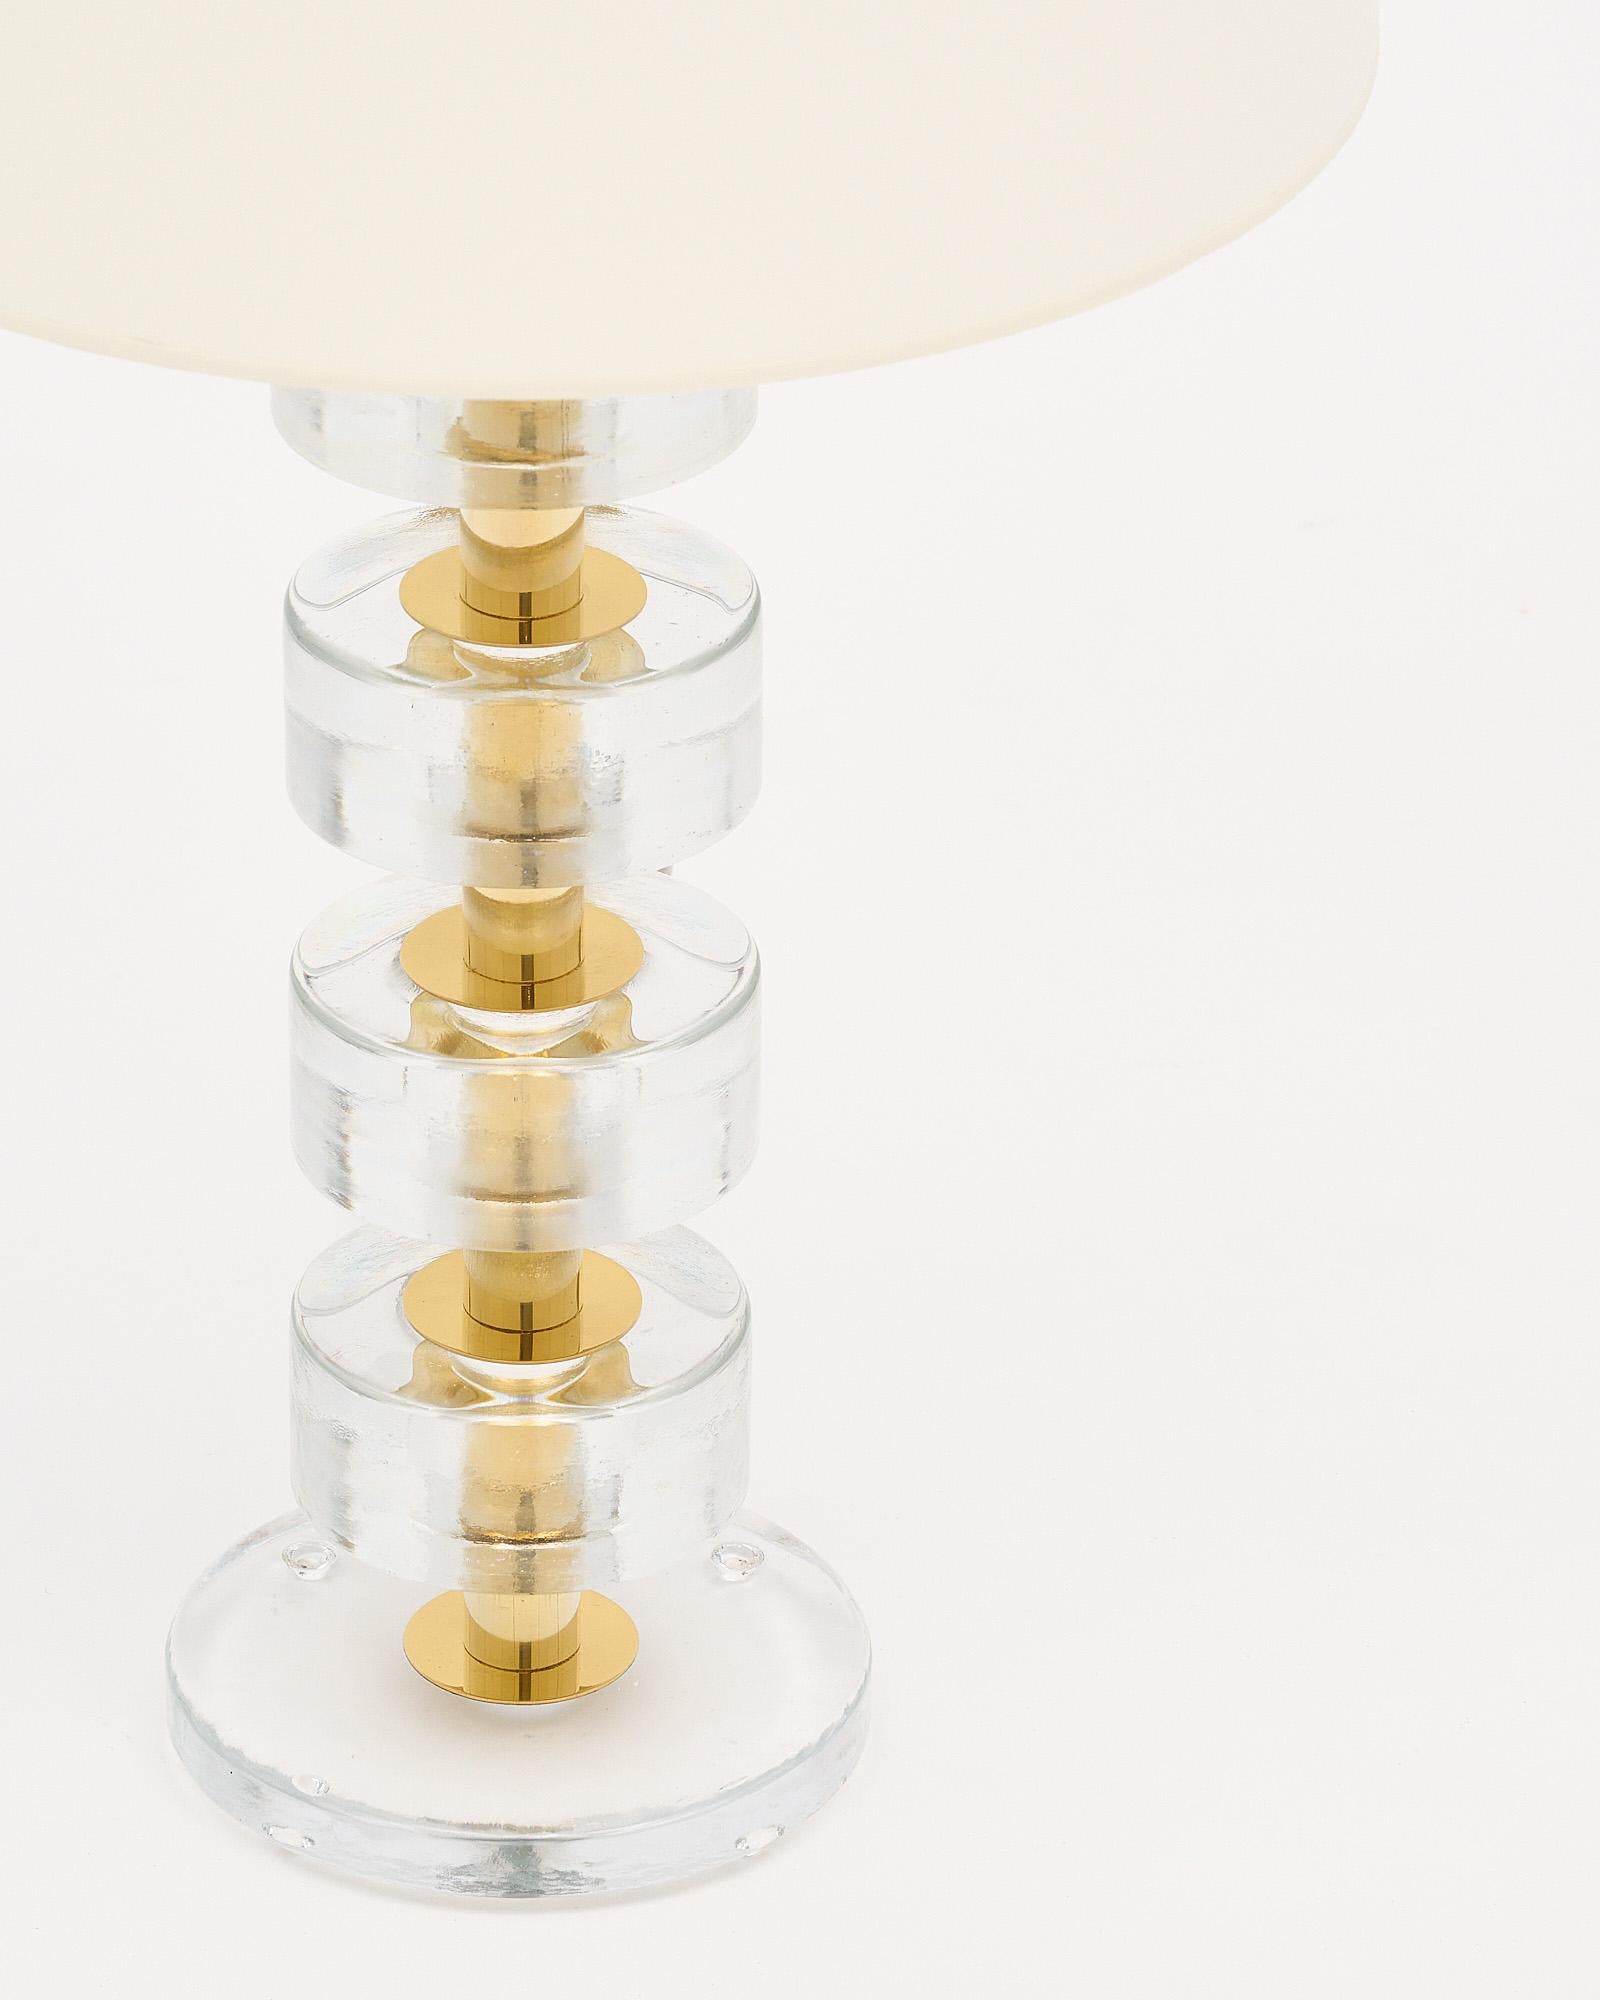 Pair of modern lamps made with brass structures and clear Murano glass elements. Each piece has hand-blown circular pieces of glass stacked around a brass center. They have been newly wired to fit US standards.

This pair is a special order from our